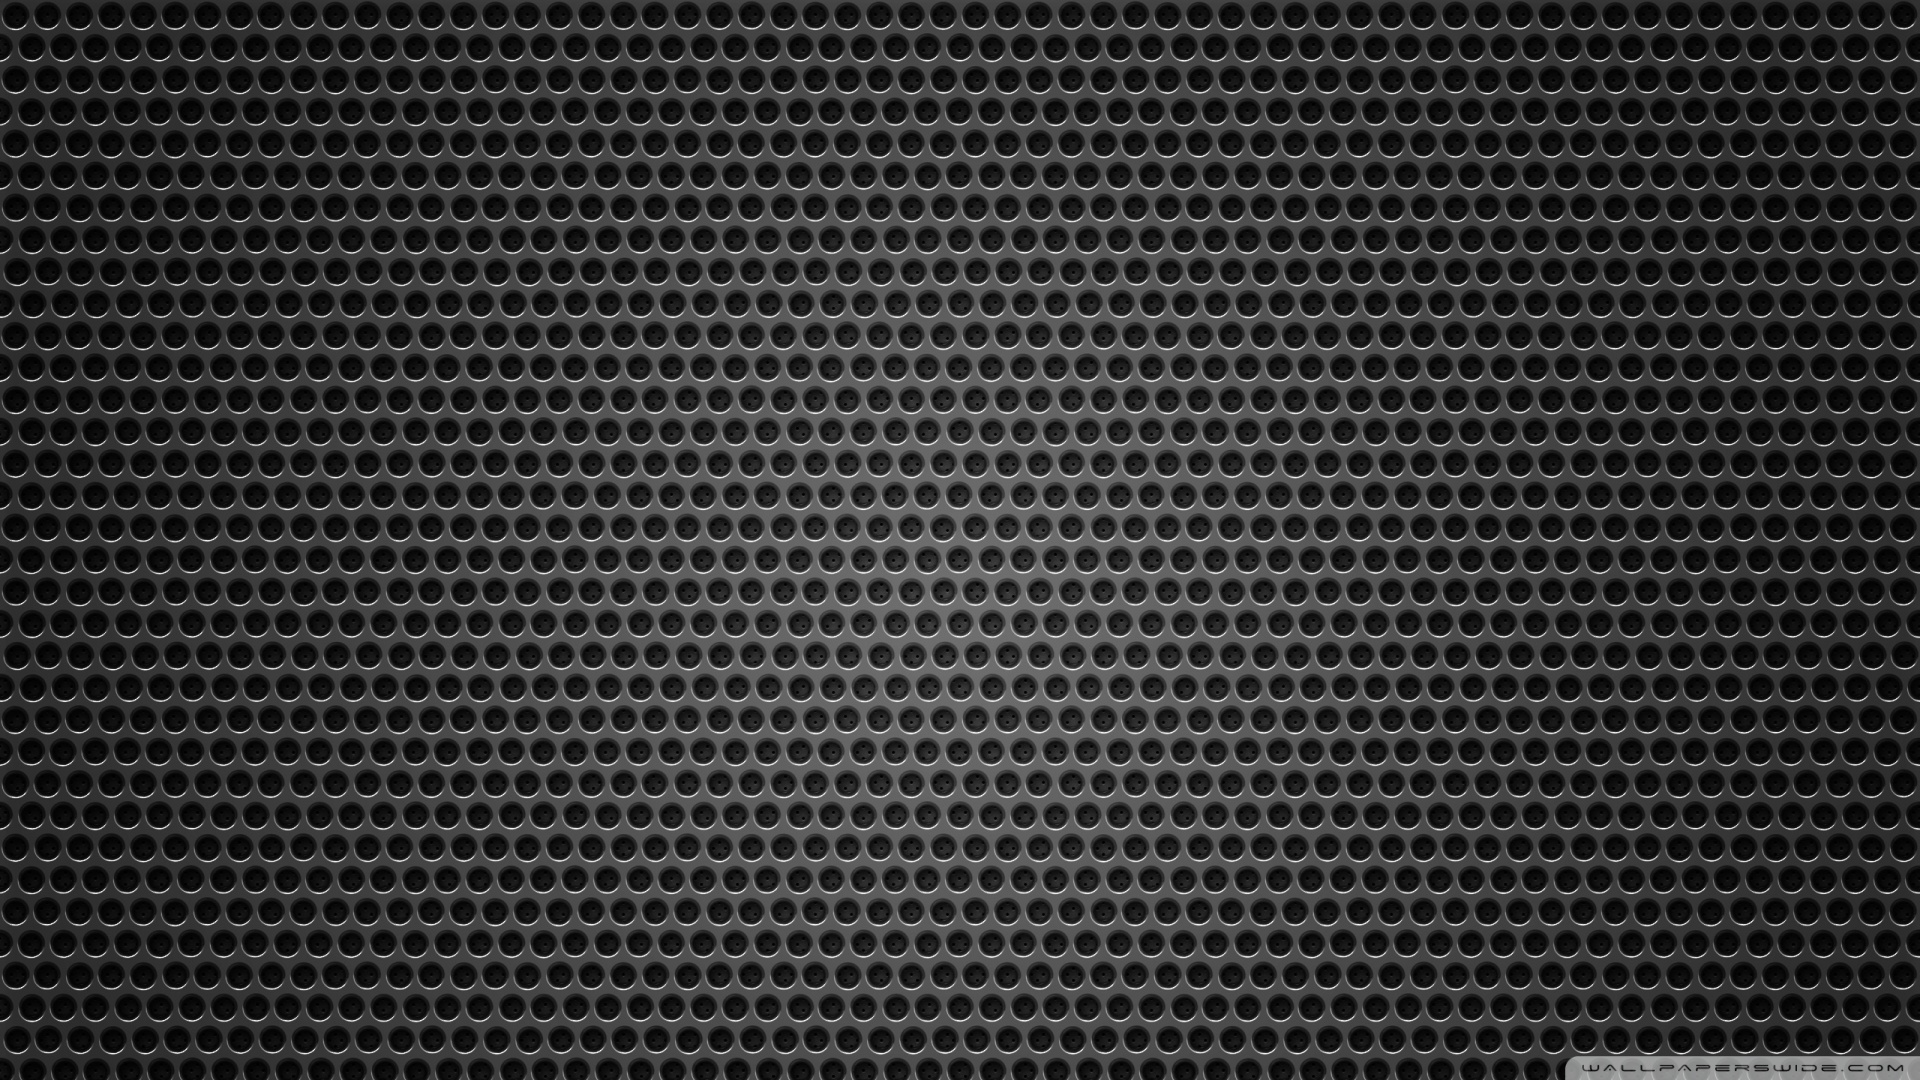 Black Backgrounds Wallpapers